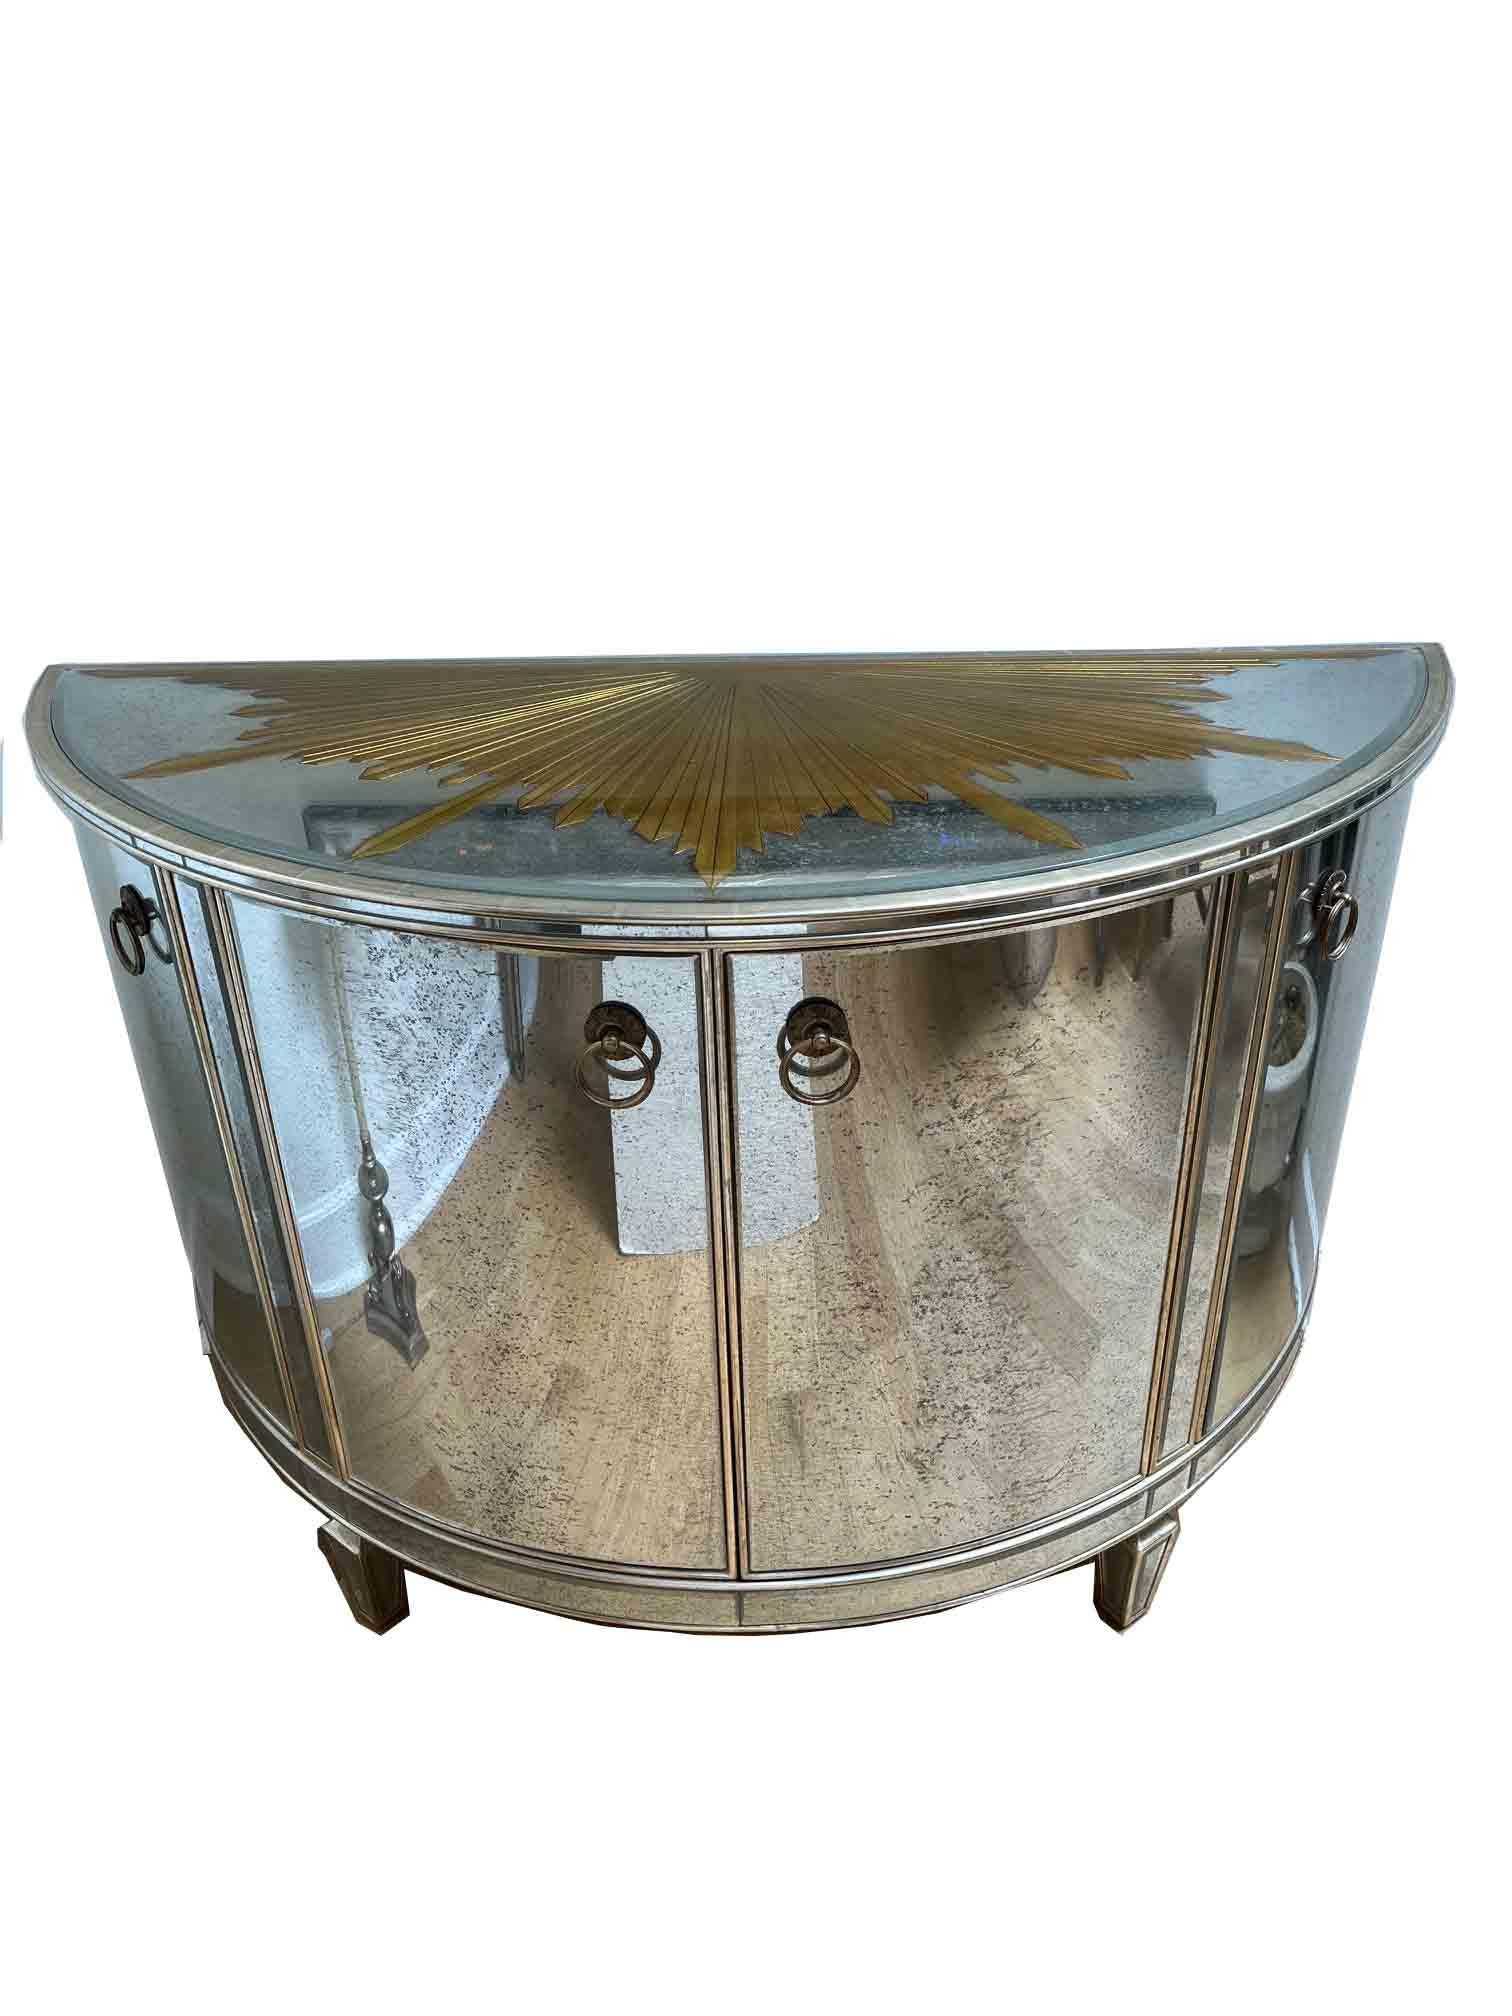 Mirrored Demi Lune Console with Starburst Gilded and Etched Element For Sale 3